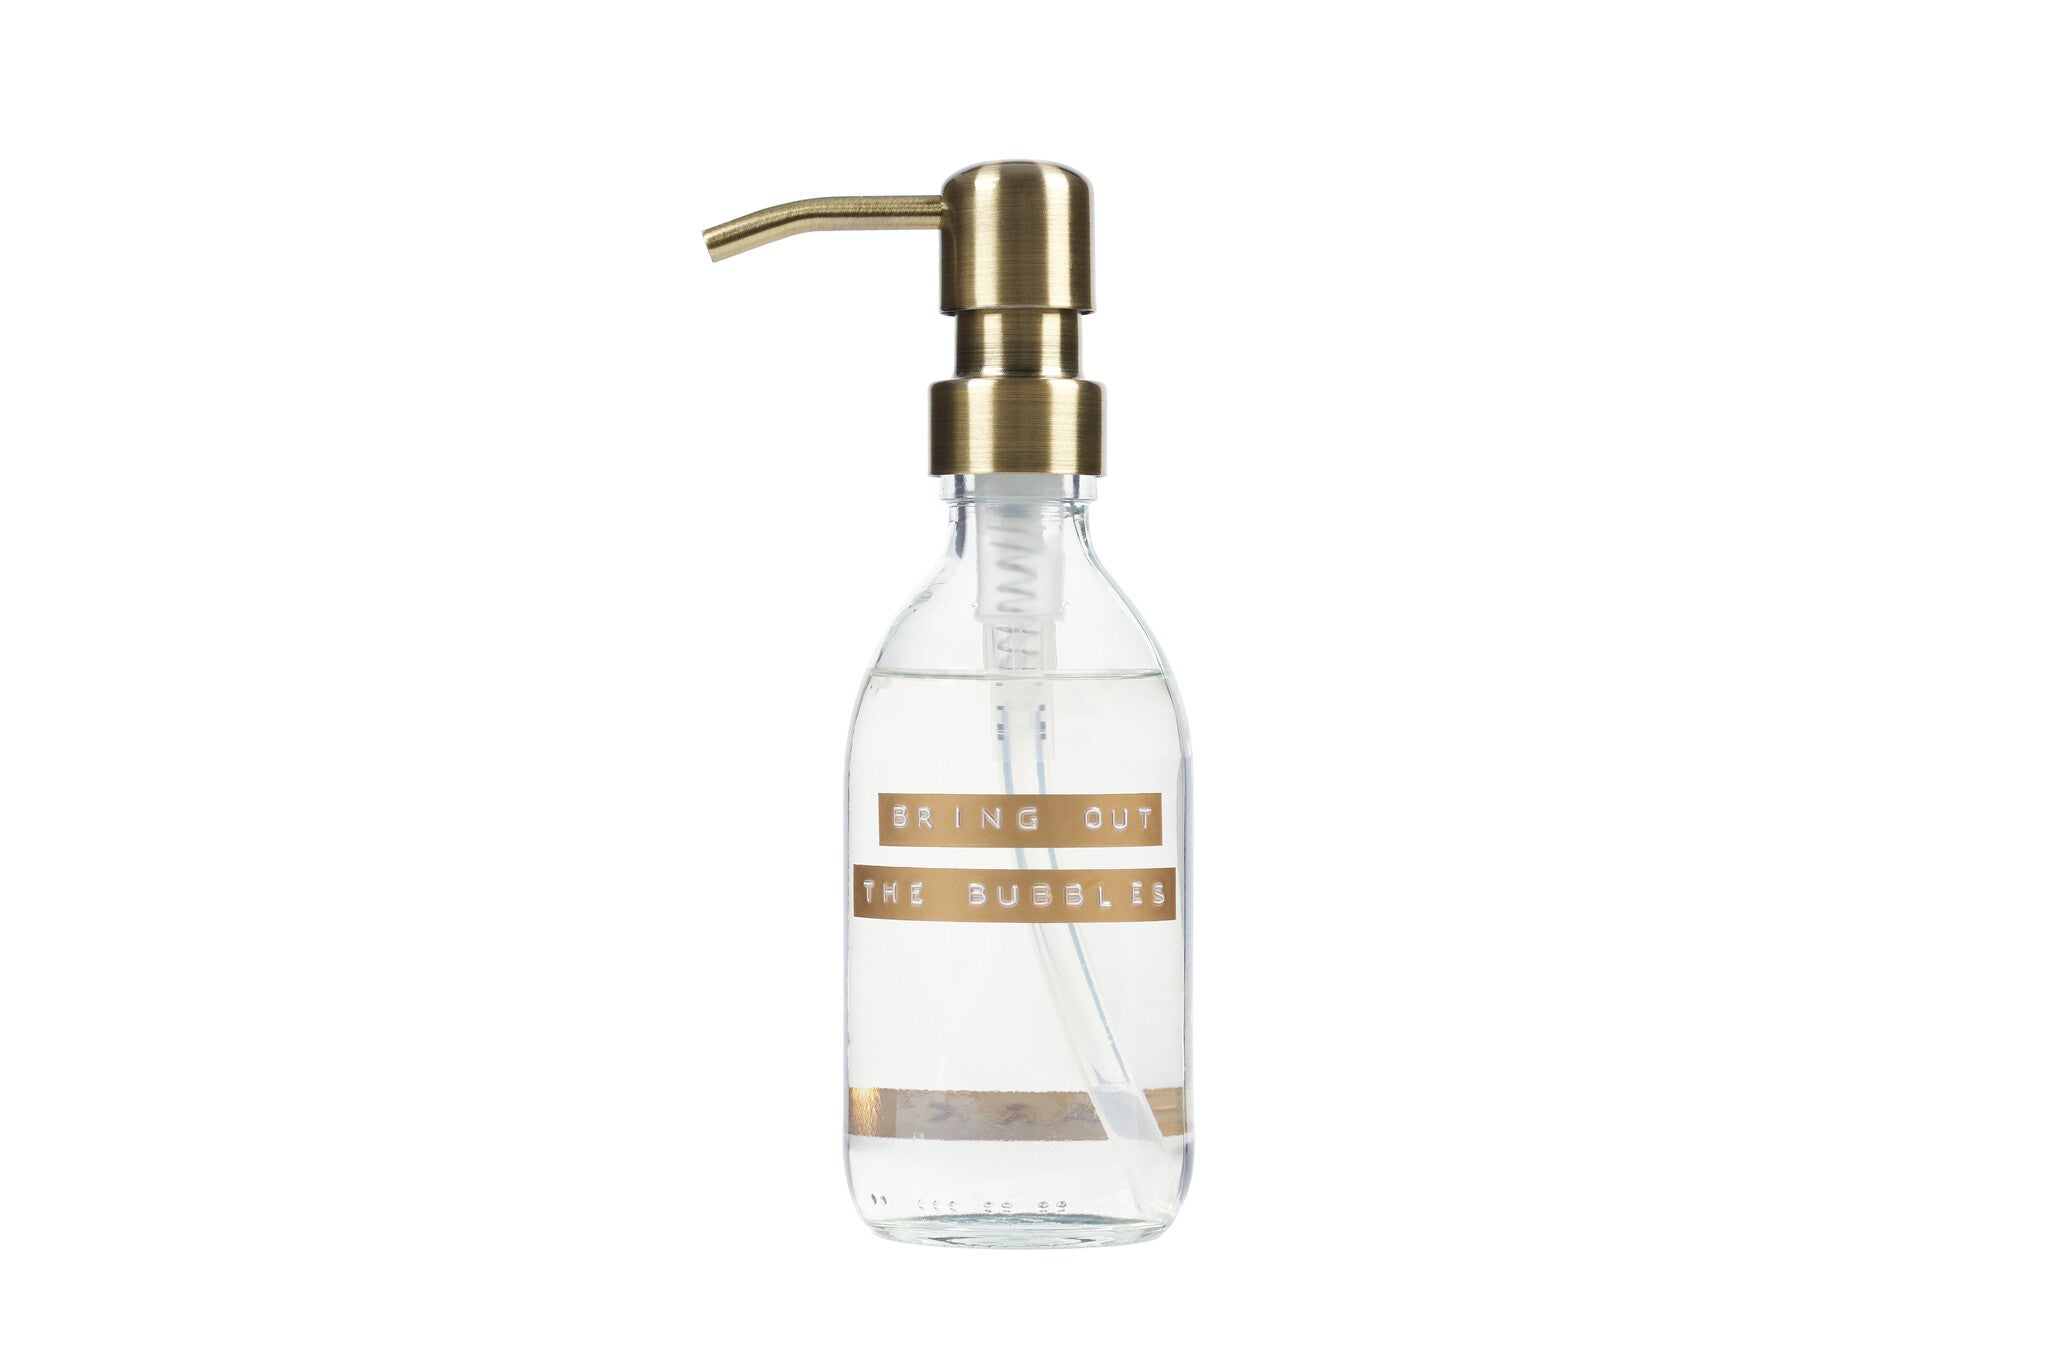 Wellmark - hand soap transparant/brass fresh linen bronze 250ml - bring out the bubbles